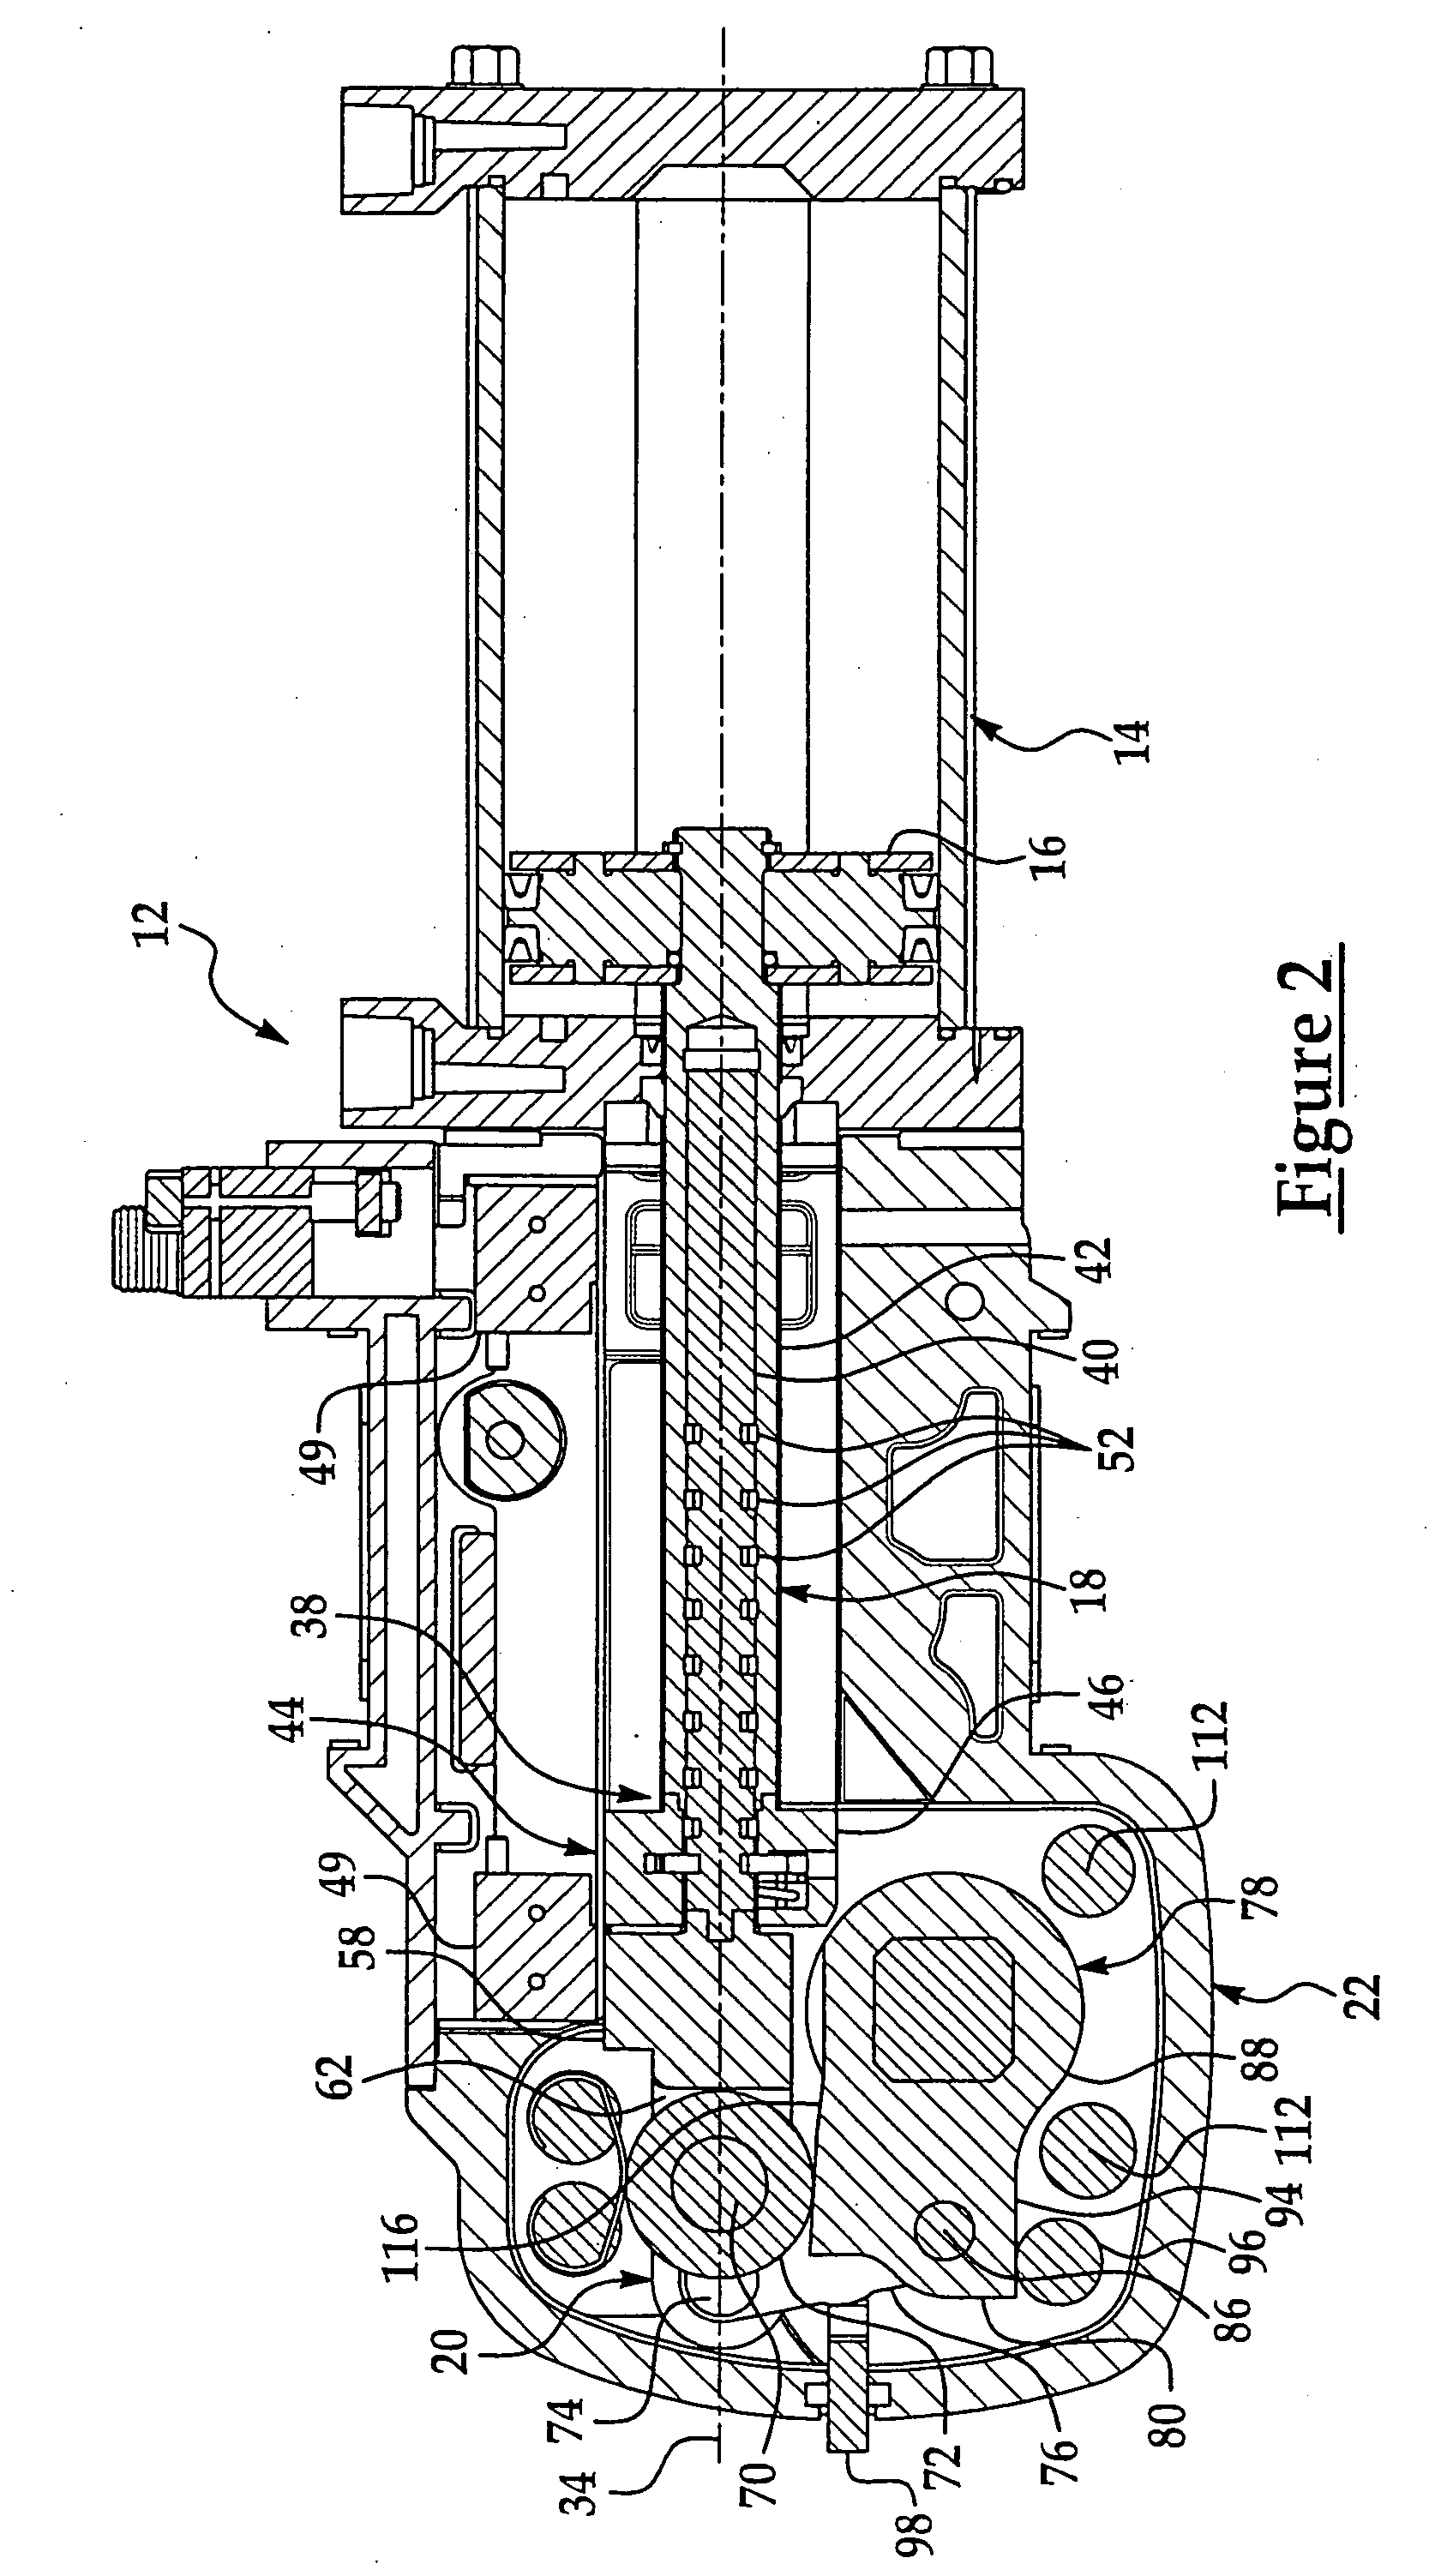 Structure for isolating mounting and clamping forces of a power clamp